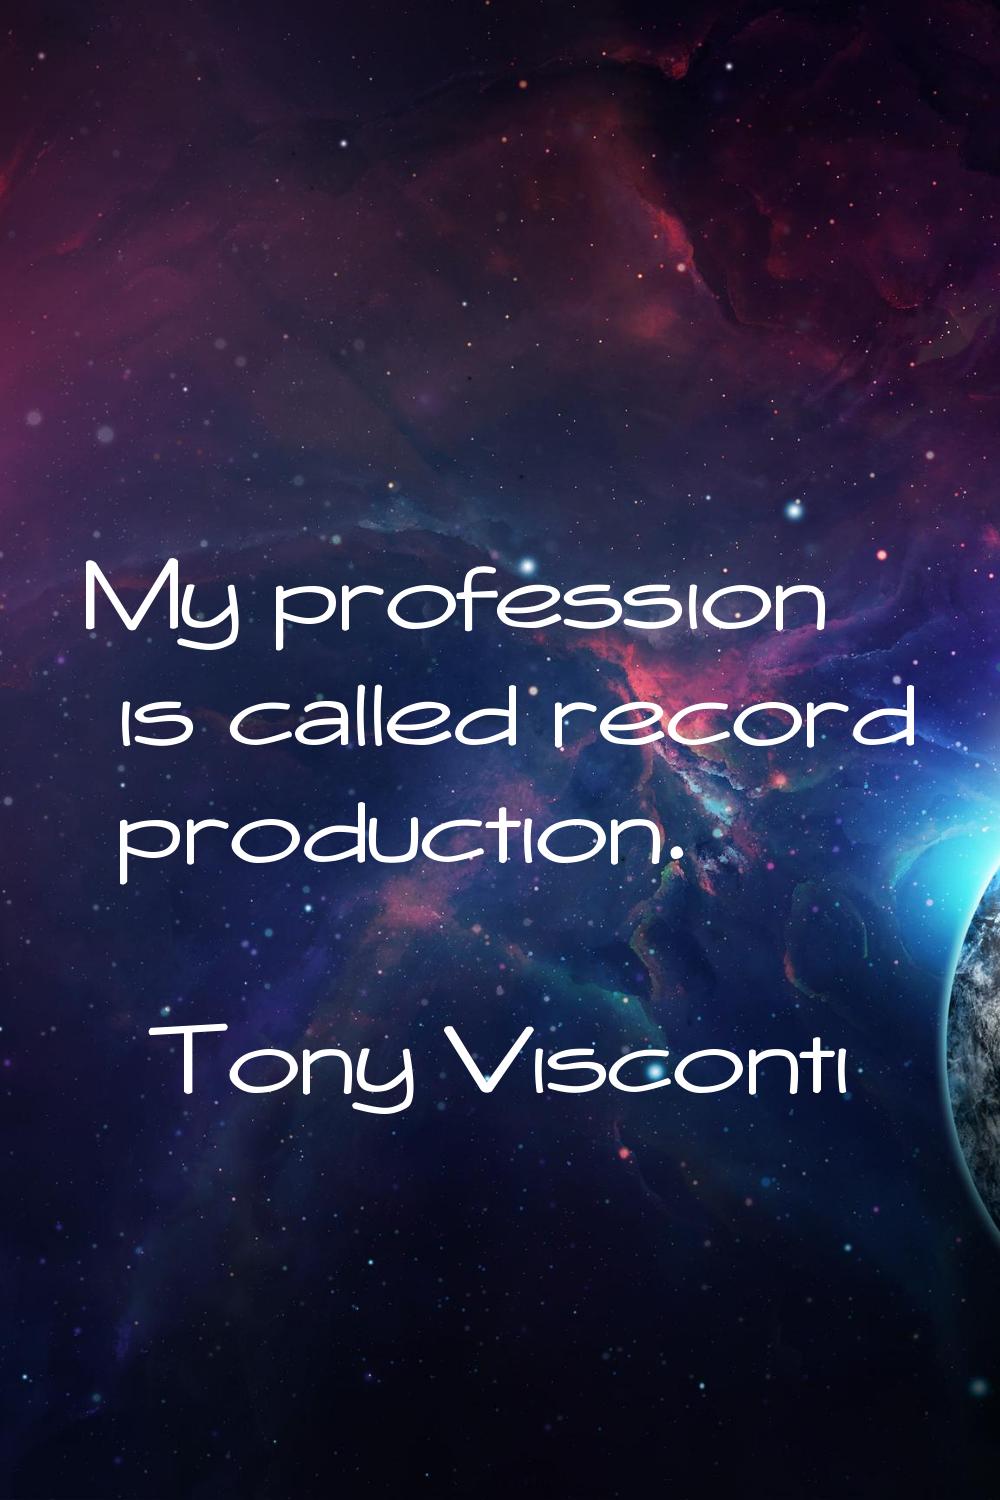 My profession is called record production.